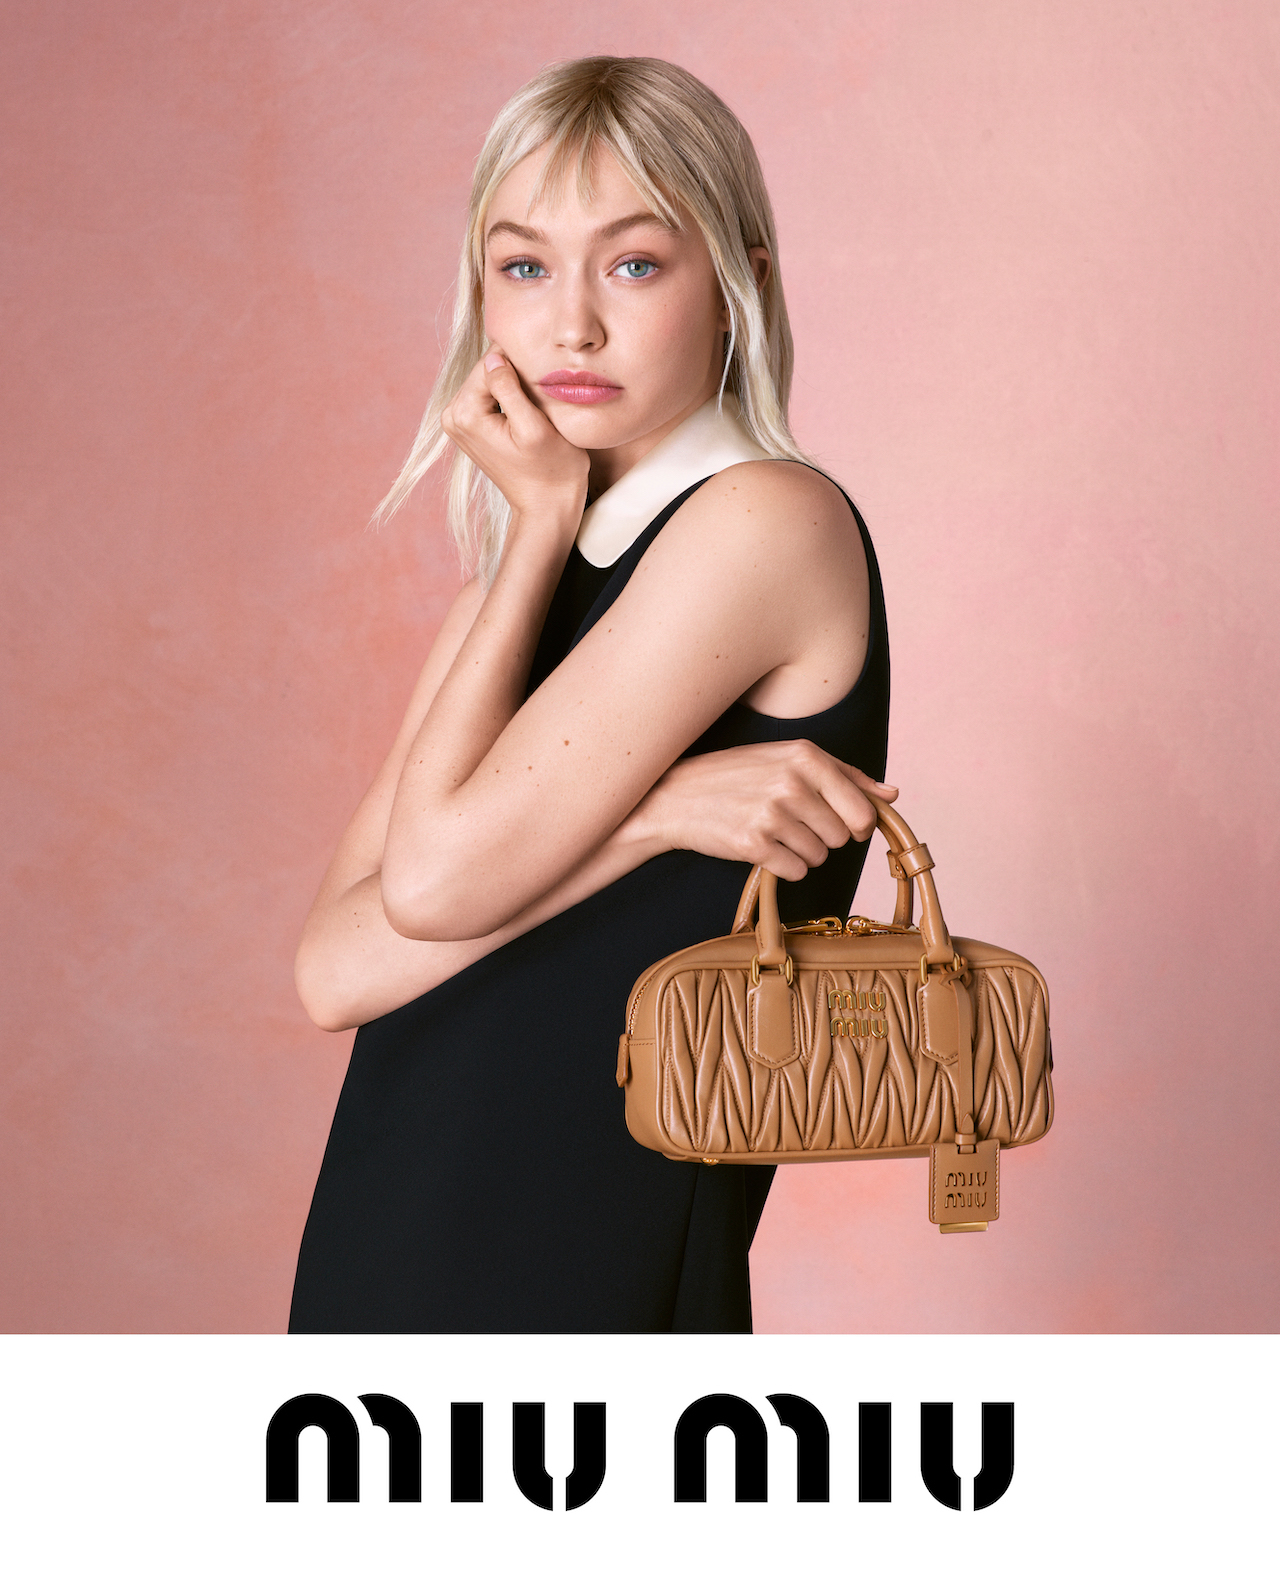 Miu Miu Launches Campaign with Gigi Hadid, Lensed by Steven Meisel – WWD